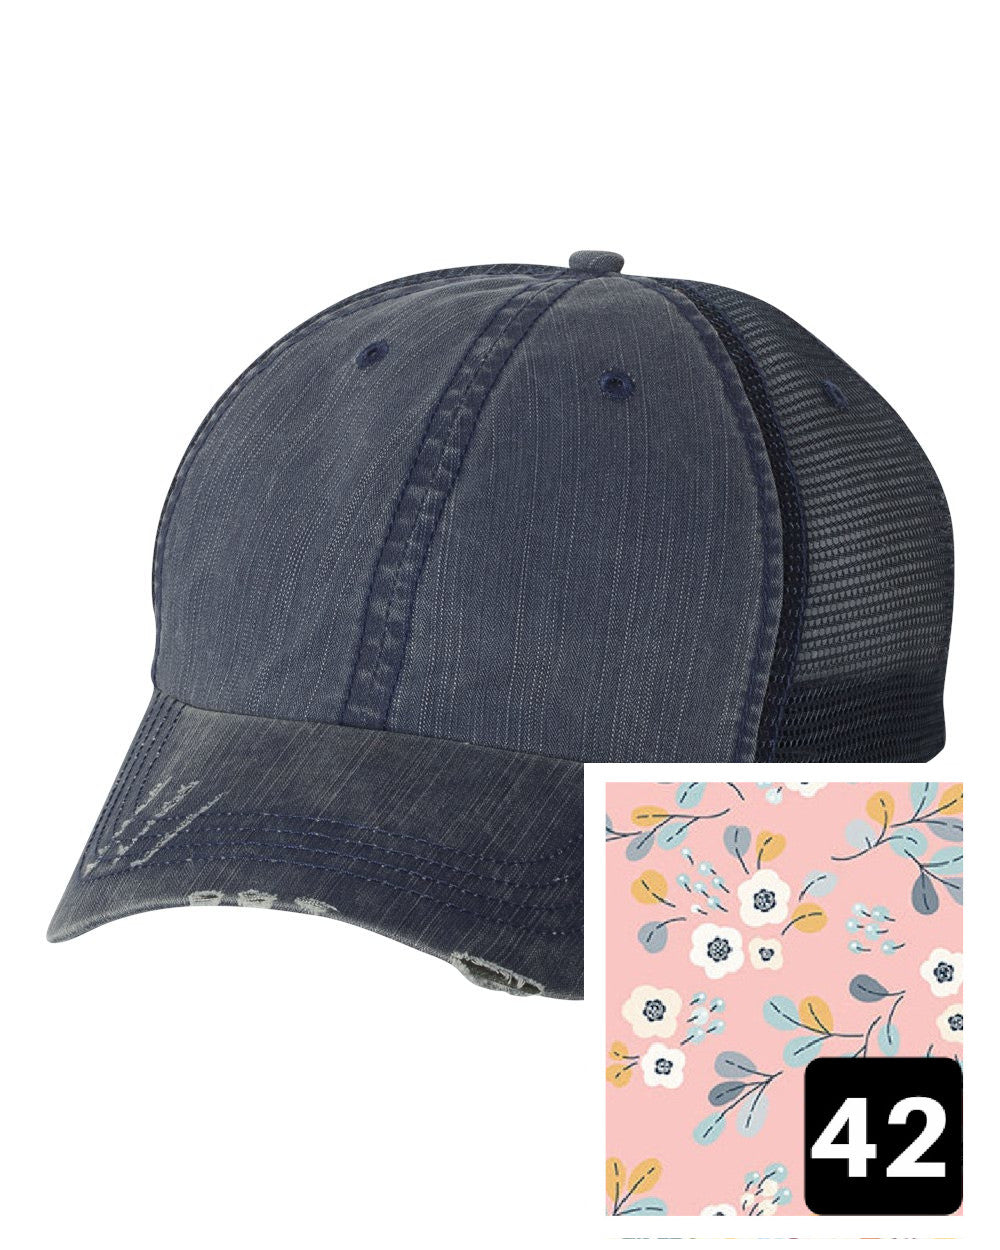 Connecticut Hat | Navy Distressed Trucker Cap | Many Fabric Choices